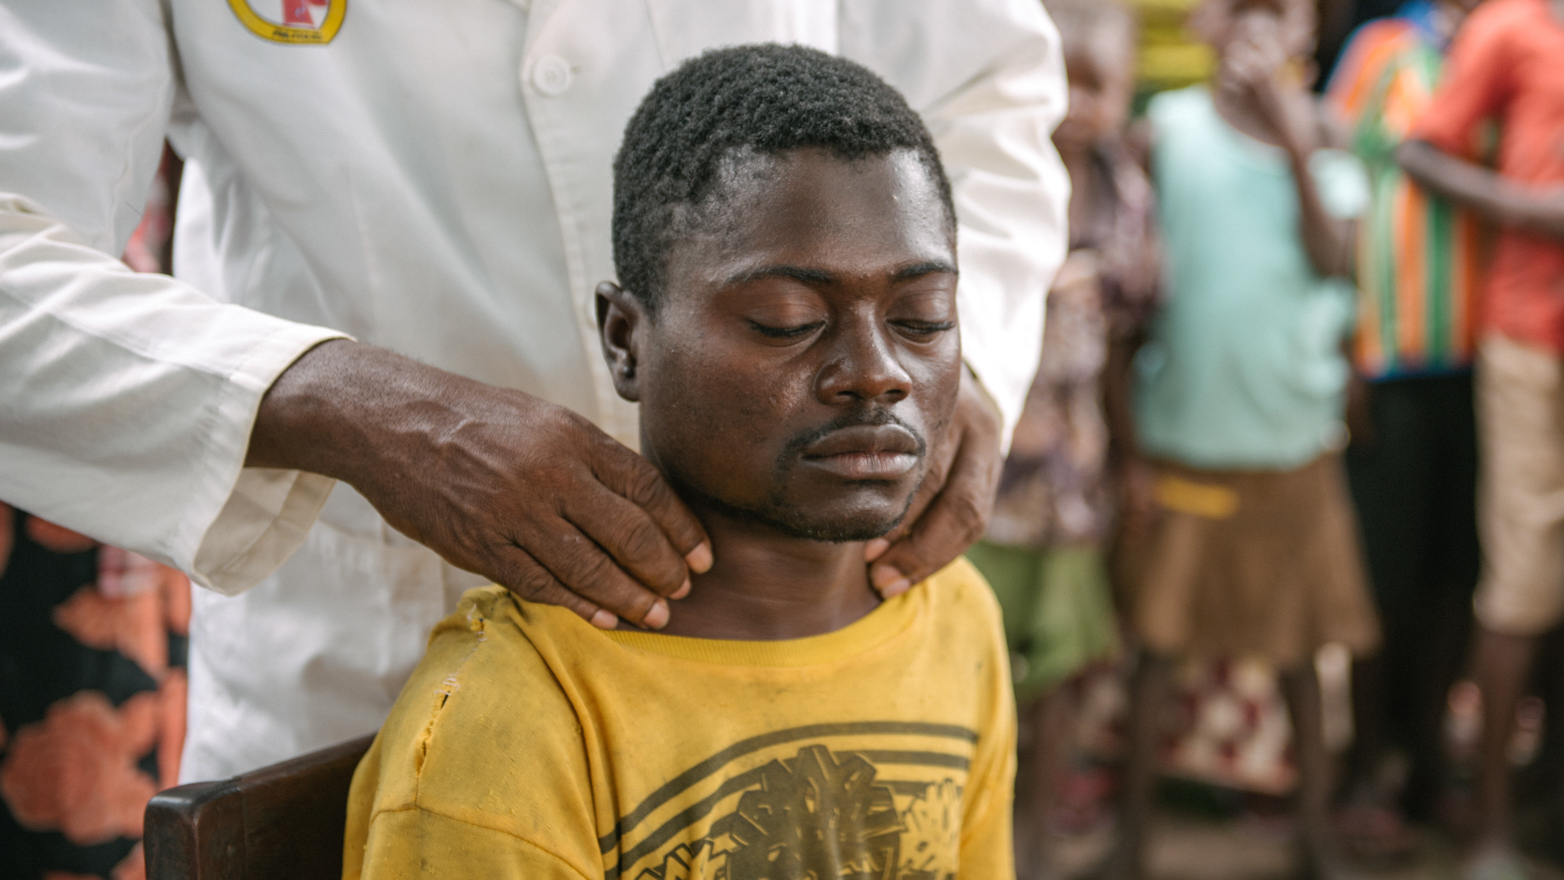 Treatment for acute sleeping sickness has been brutal — until now